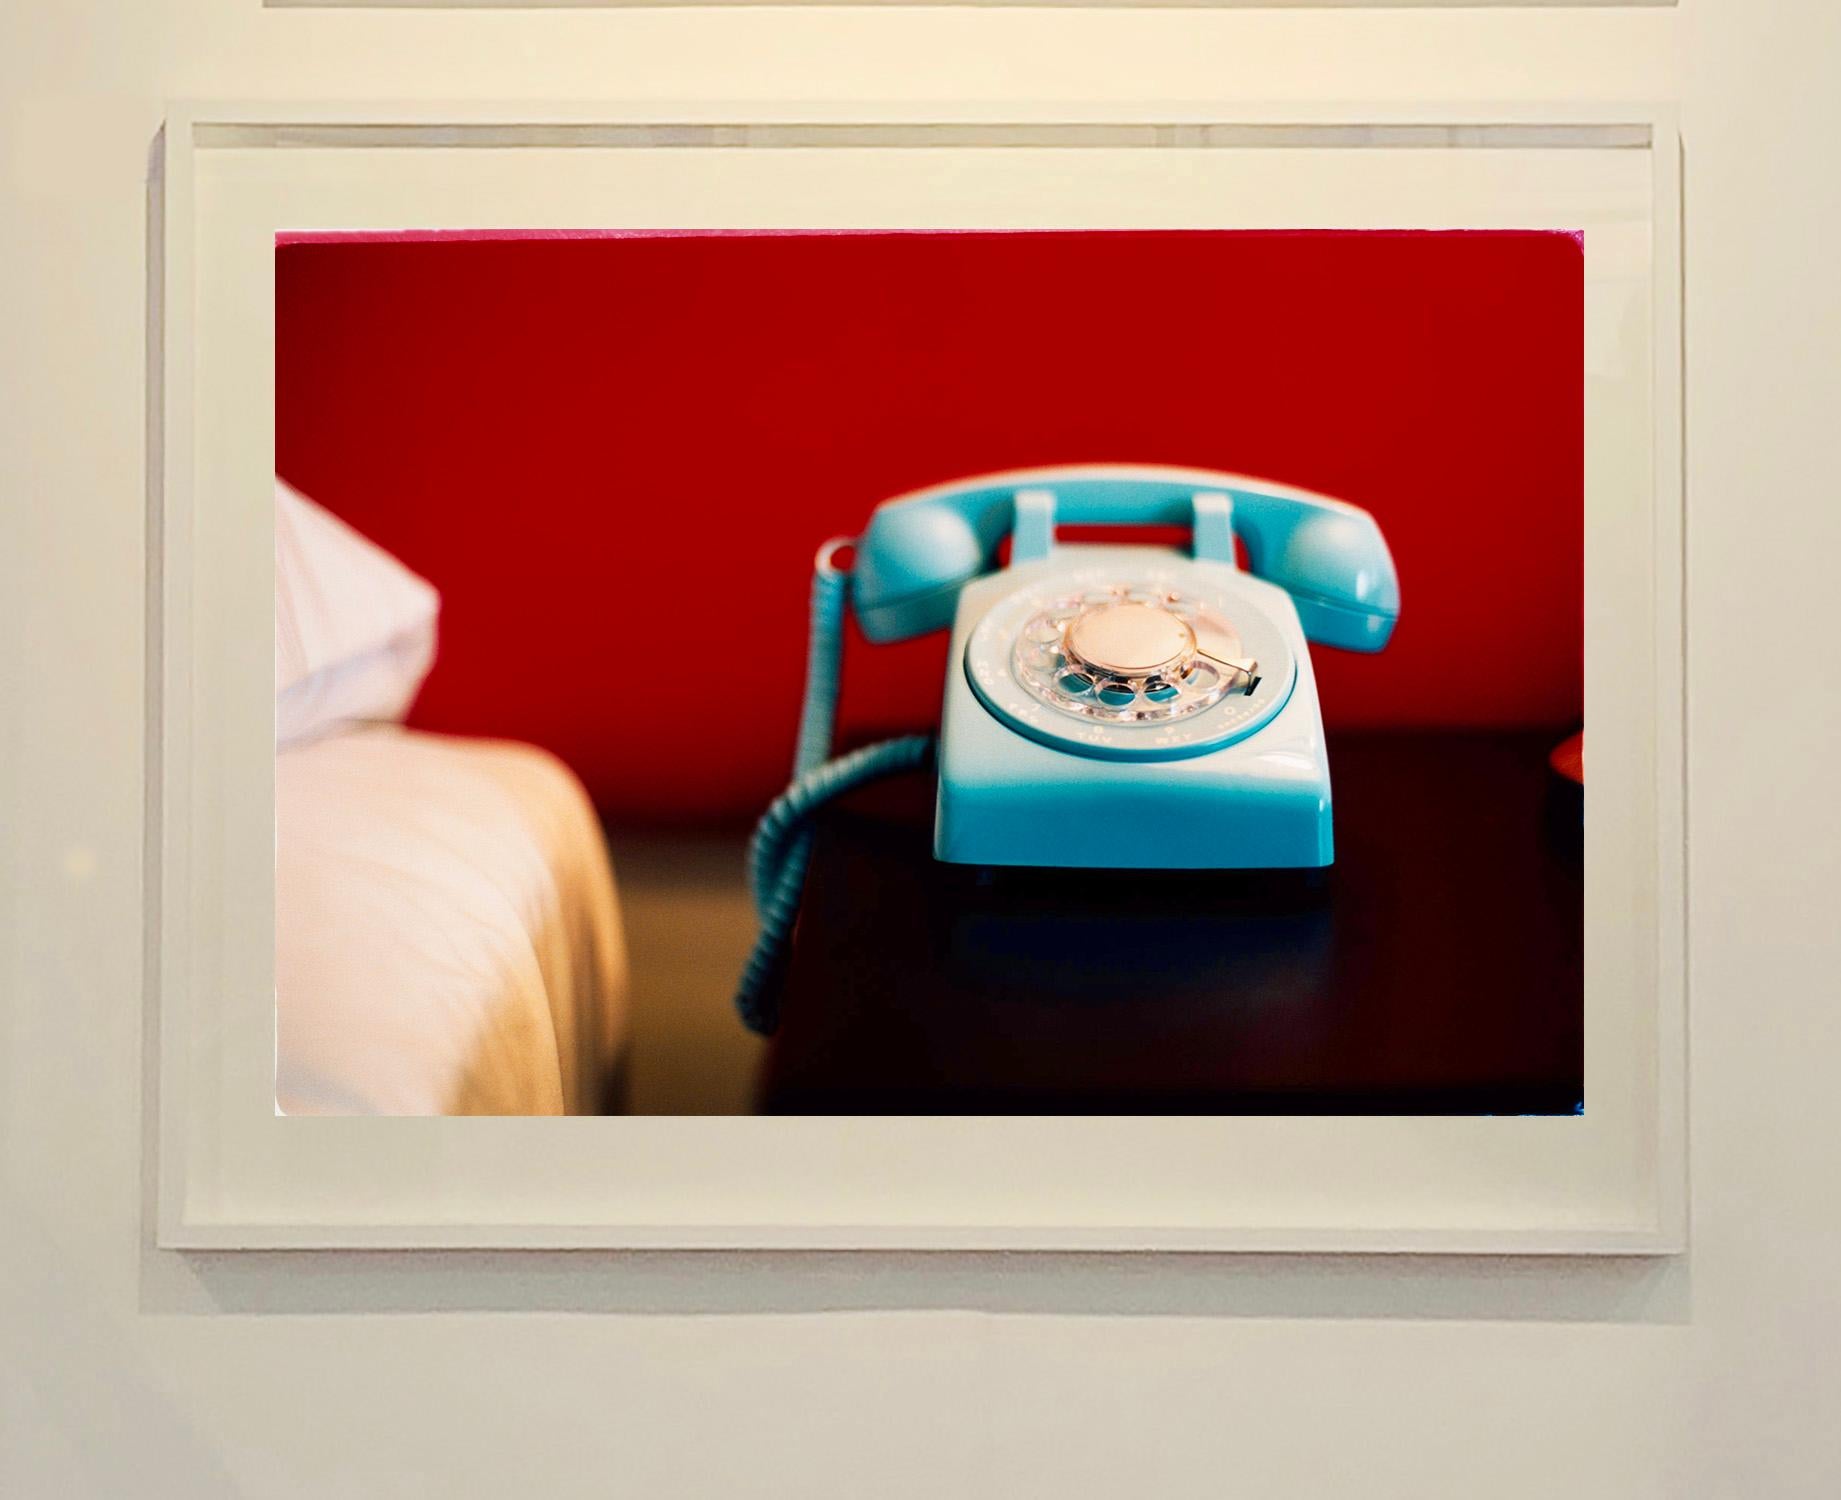 Telephone I, Ballantines Movie Colony, Palm Springs - Interior Color Photography - Print by Richard Heeps